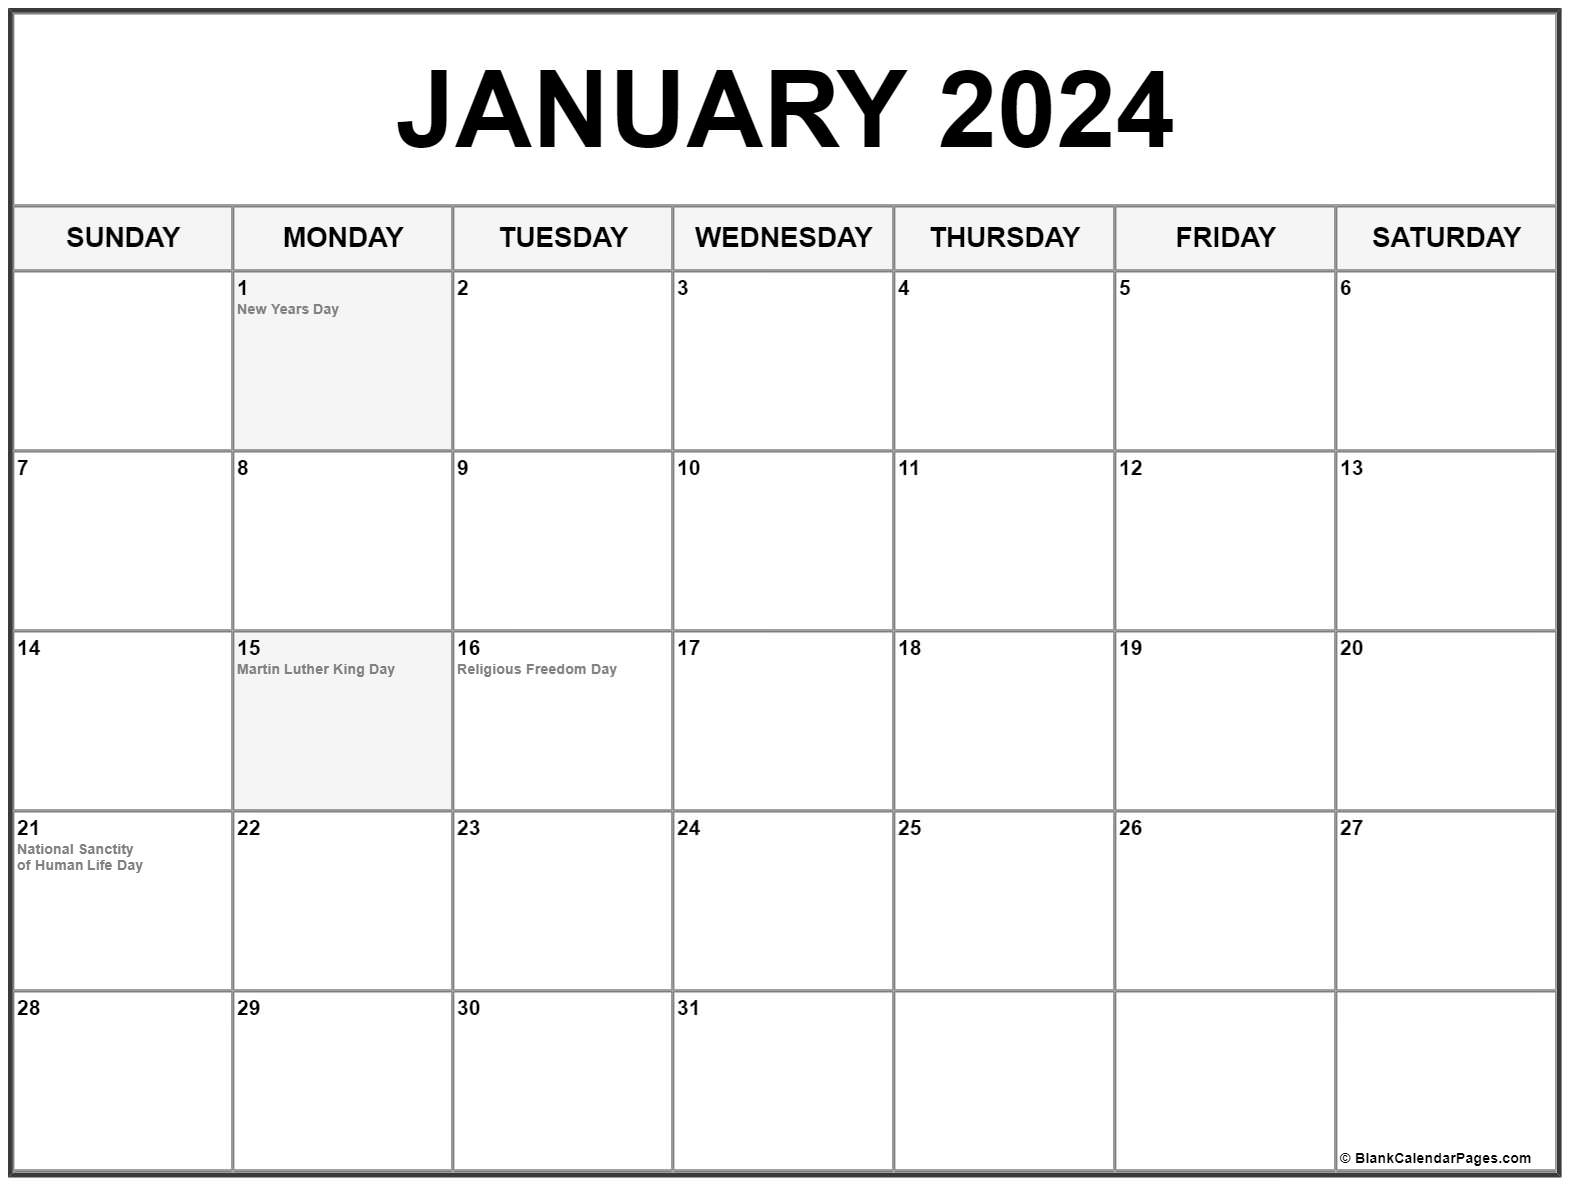 January 2024 With Holidays Calendar Free Printable 2024 Calendar With - Free Printable 2024 Calendar With Holidays And Observances